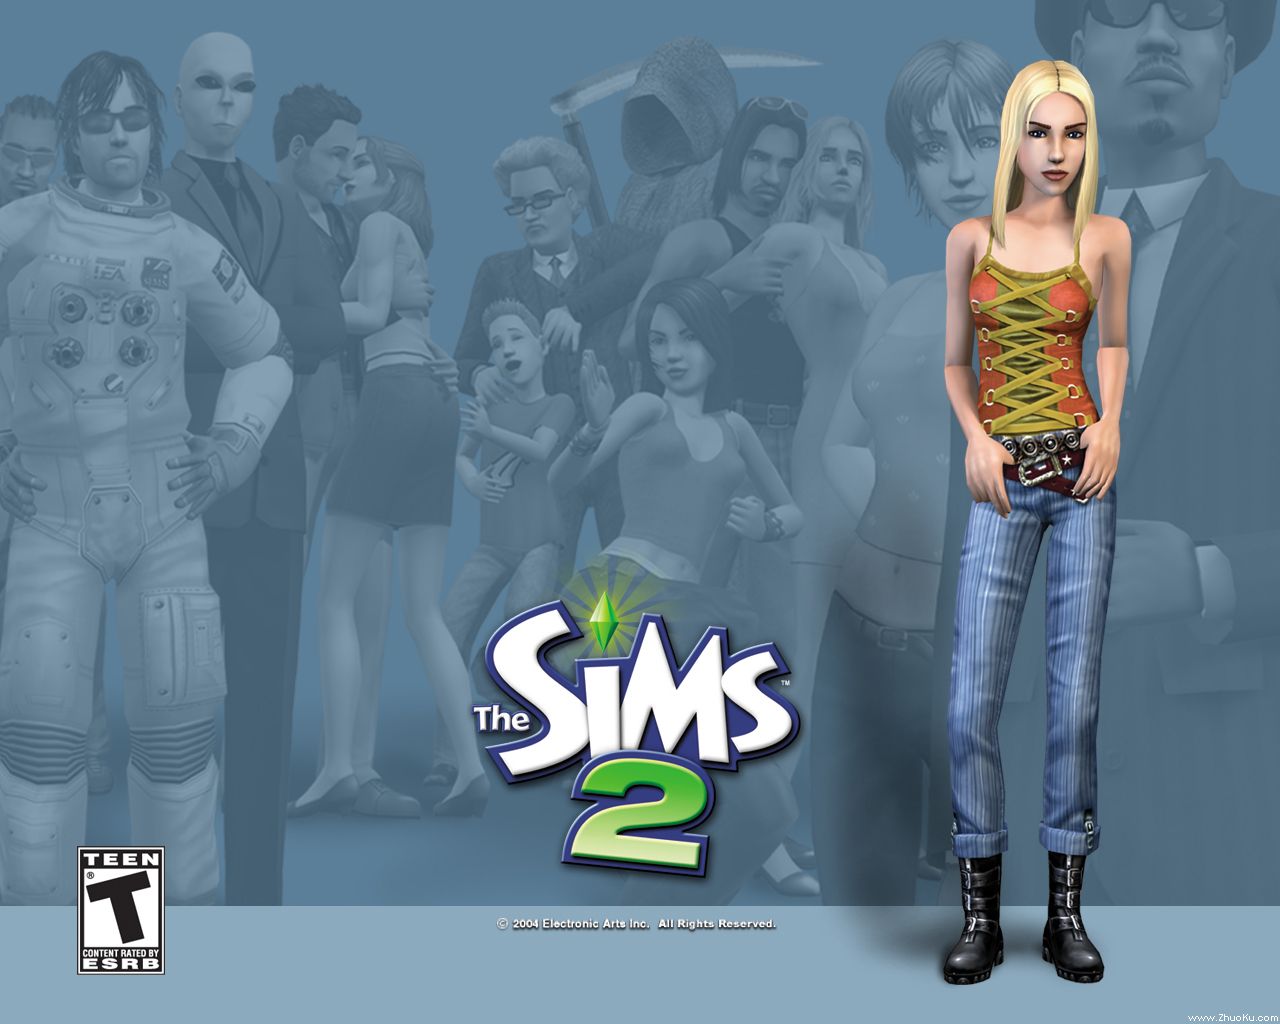 ģ2(The Sims 2)ֽ(ֽ19)